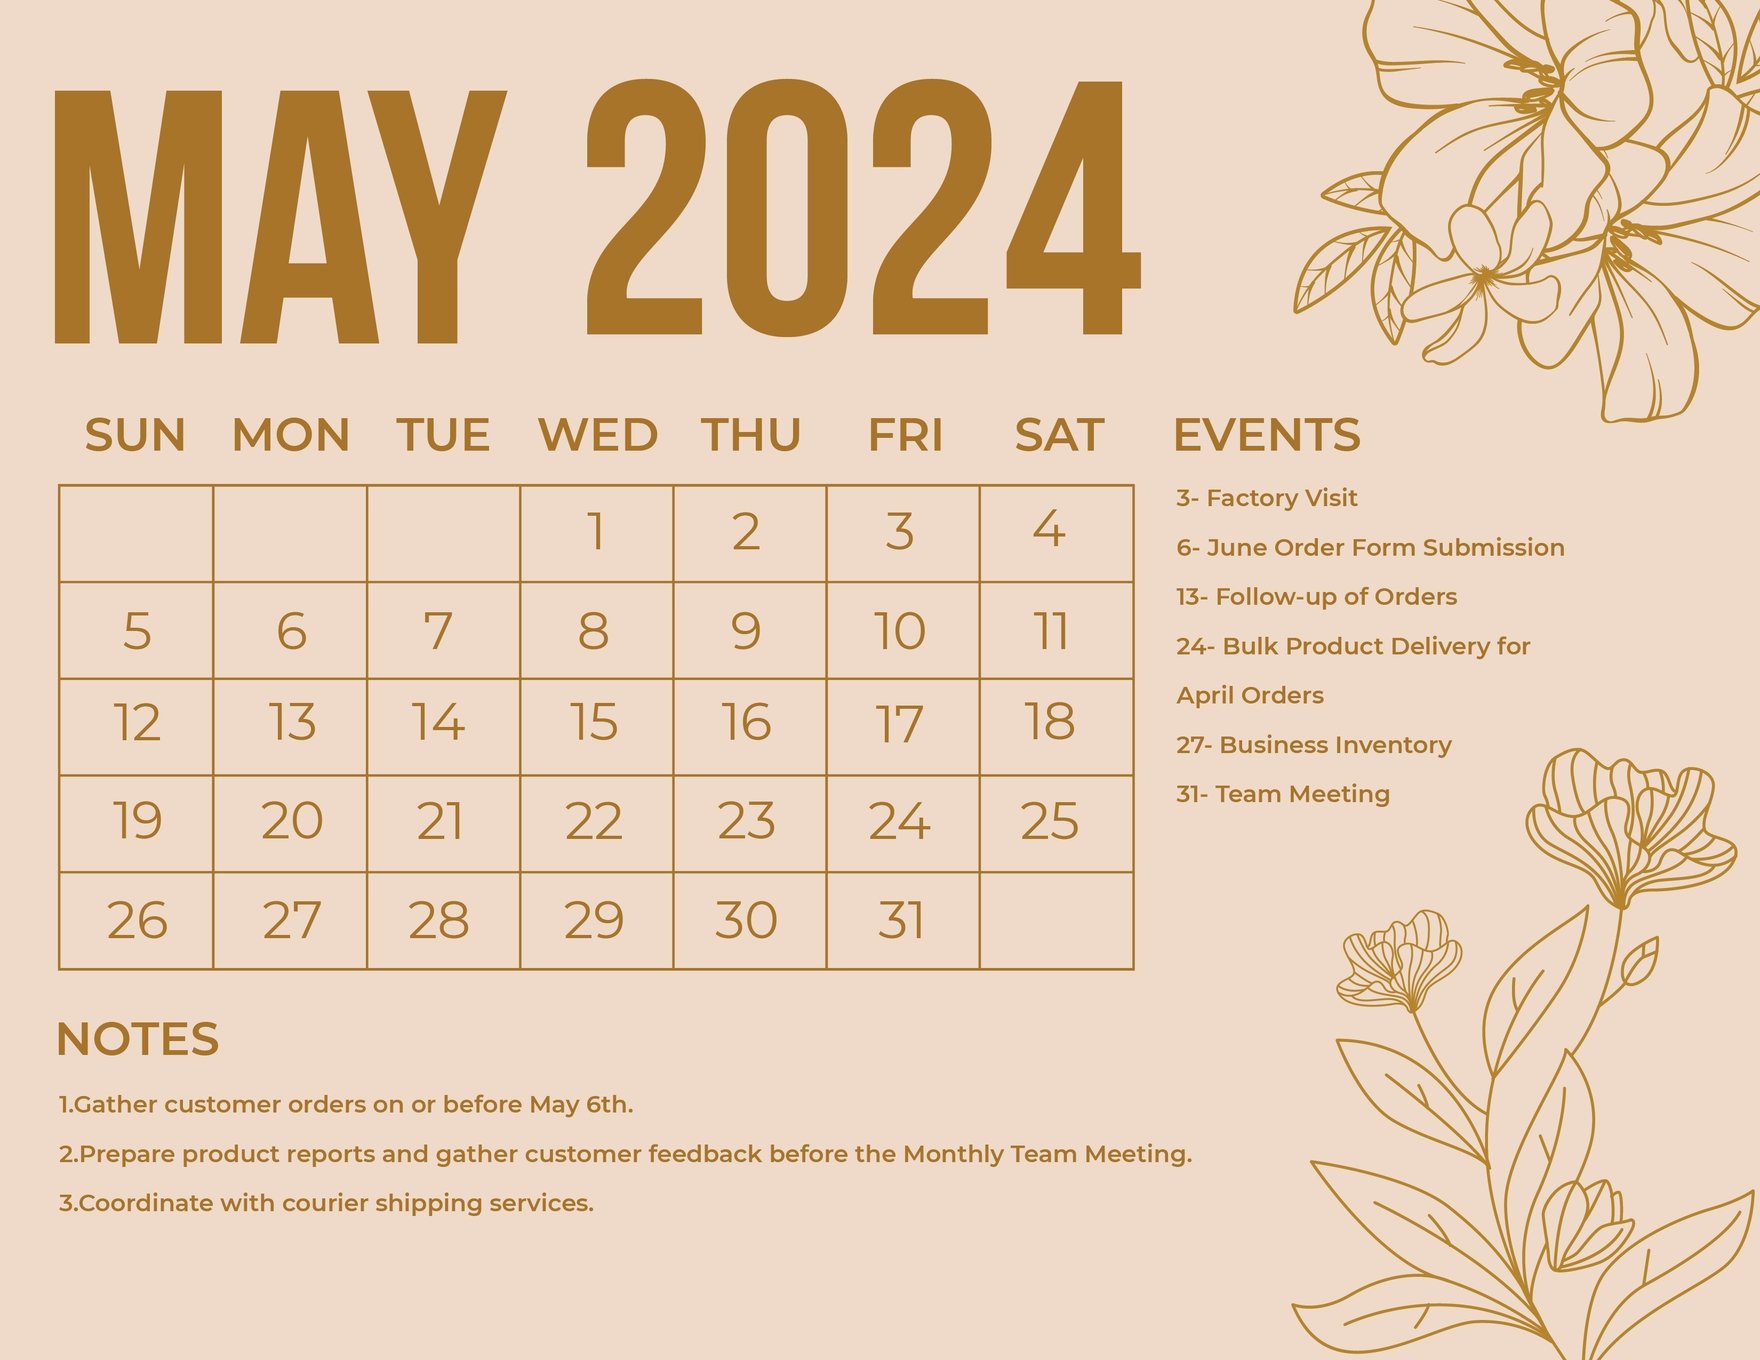 May 2024 Calendar Template in Word FREE Download